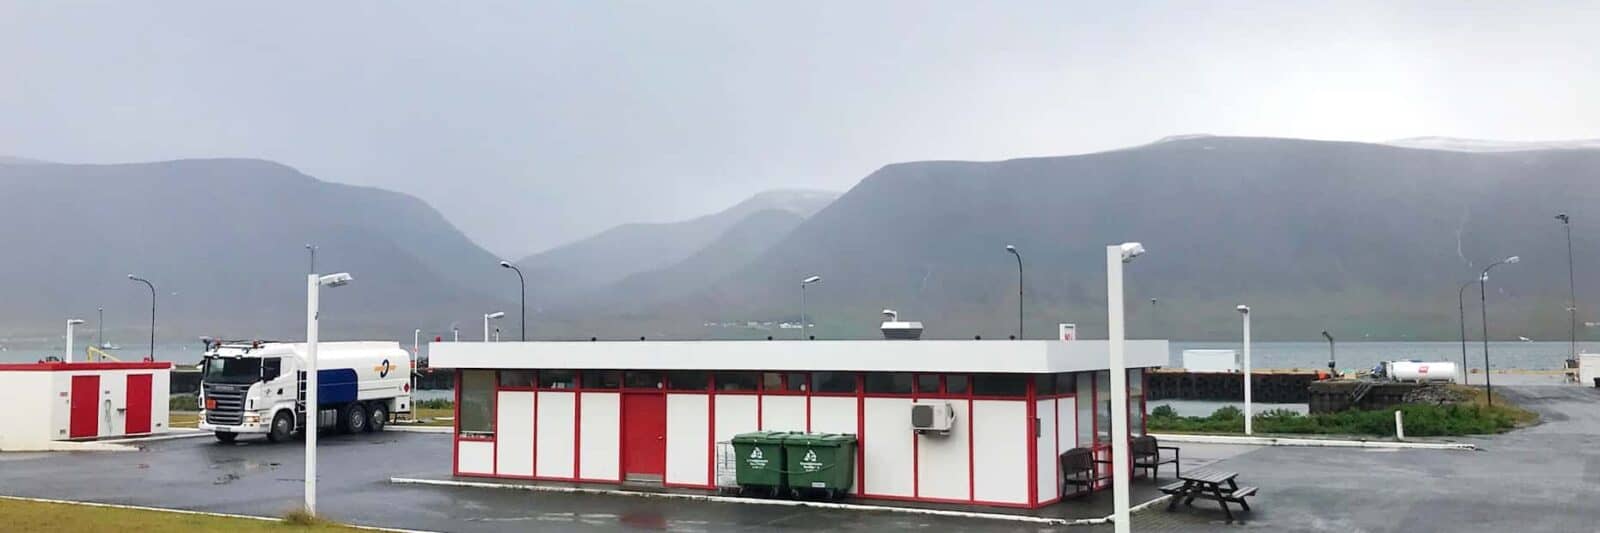 5 Things To Know About Gas Stations In Iceland